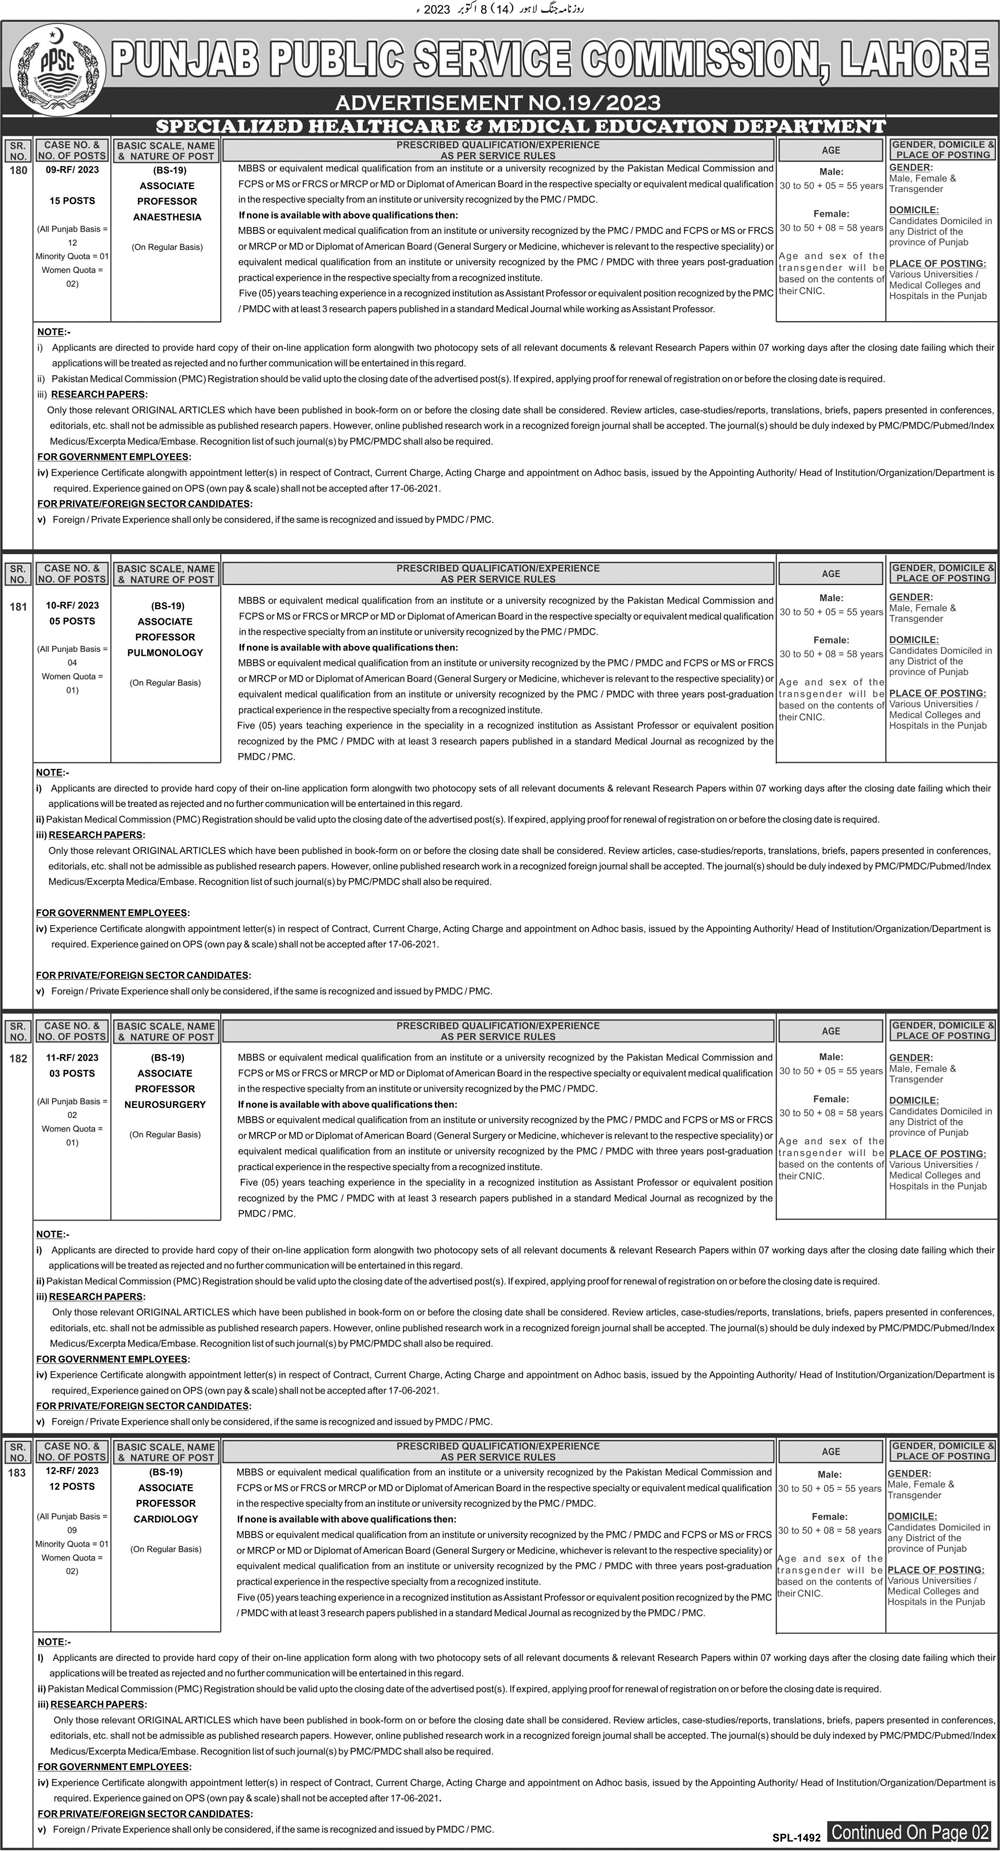 BISE, Health Department and Home Department Vacancies through PPSC